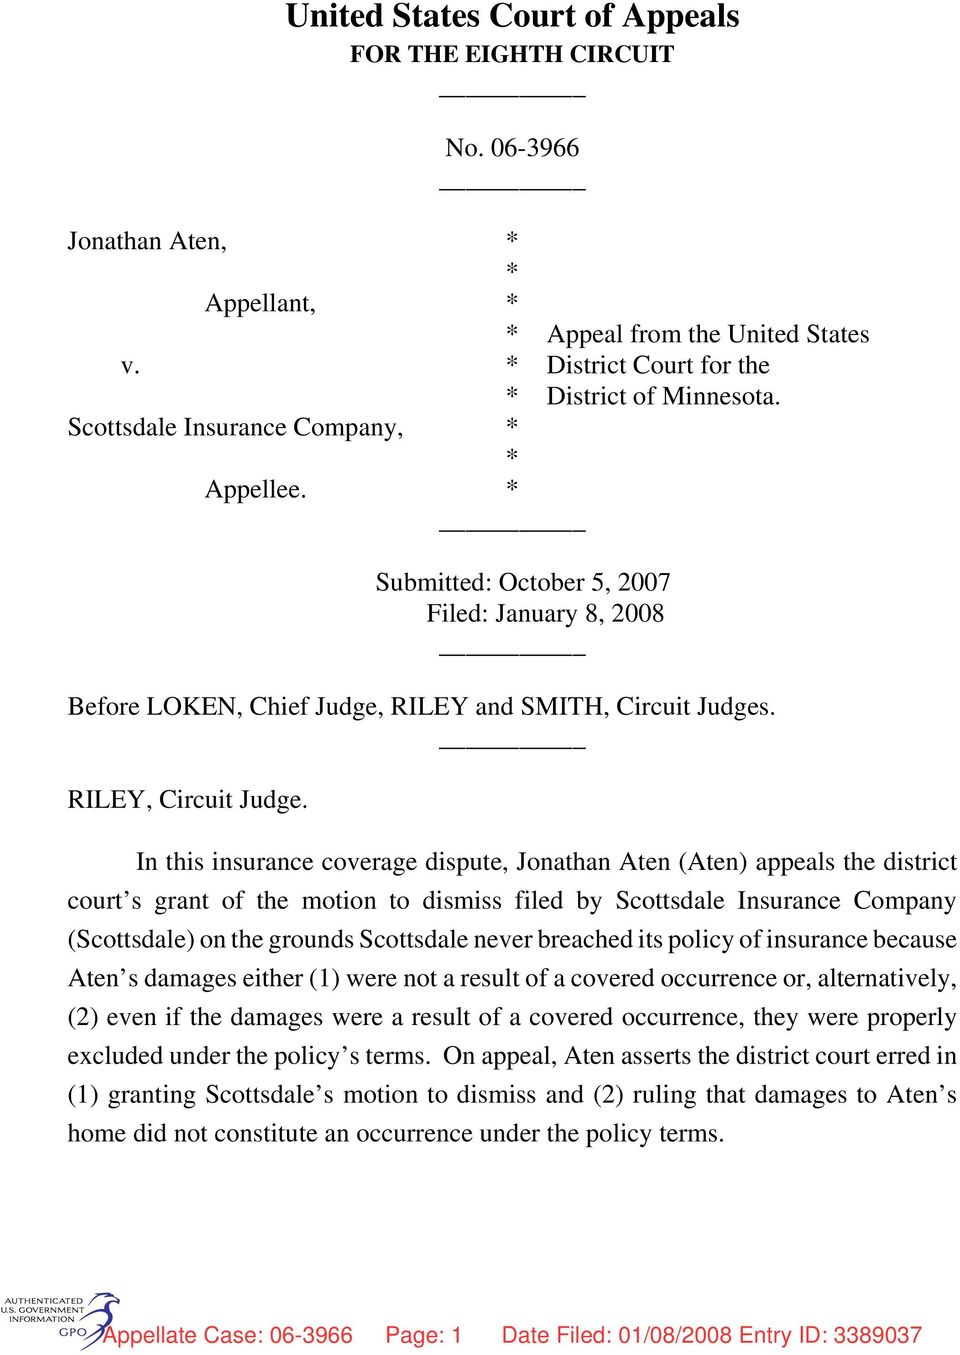 In this insurance coverage dispute, Jonathan Aten (Aten) appeals the district court s grant of the motion to dismiss filed by Scottsdale Insurance Company (Scottsdale) on the grounds Scottsdale never